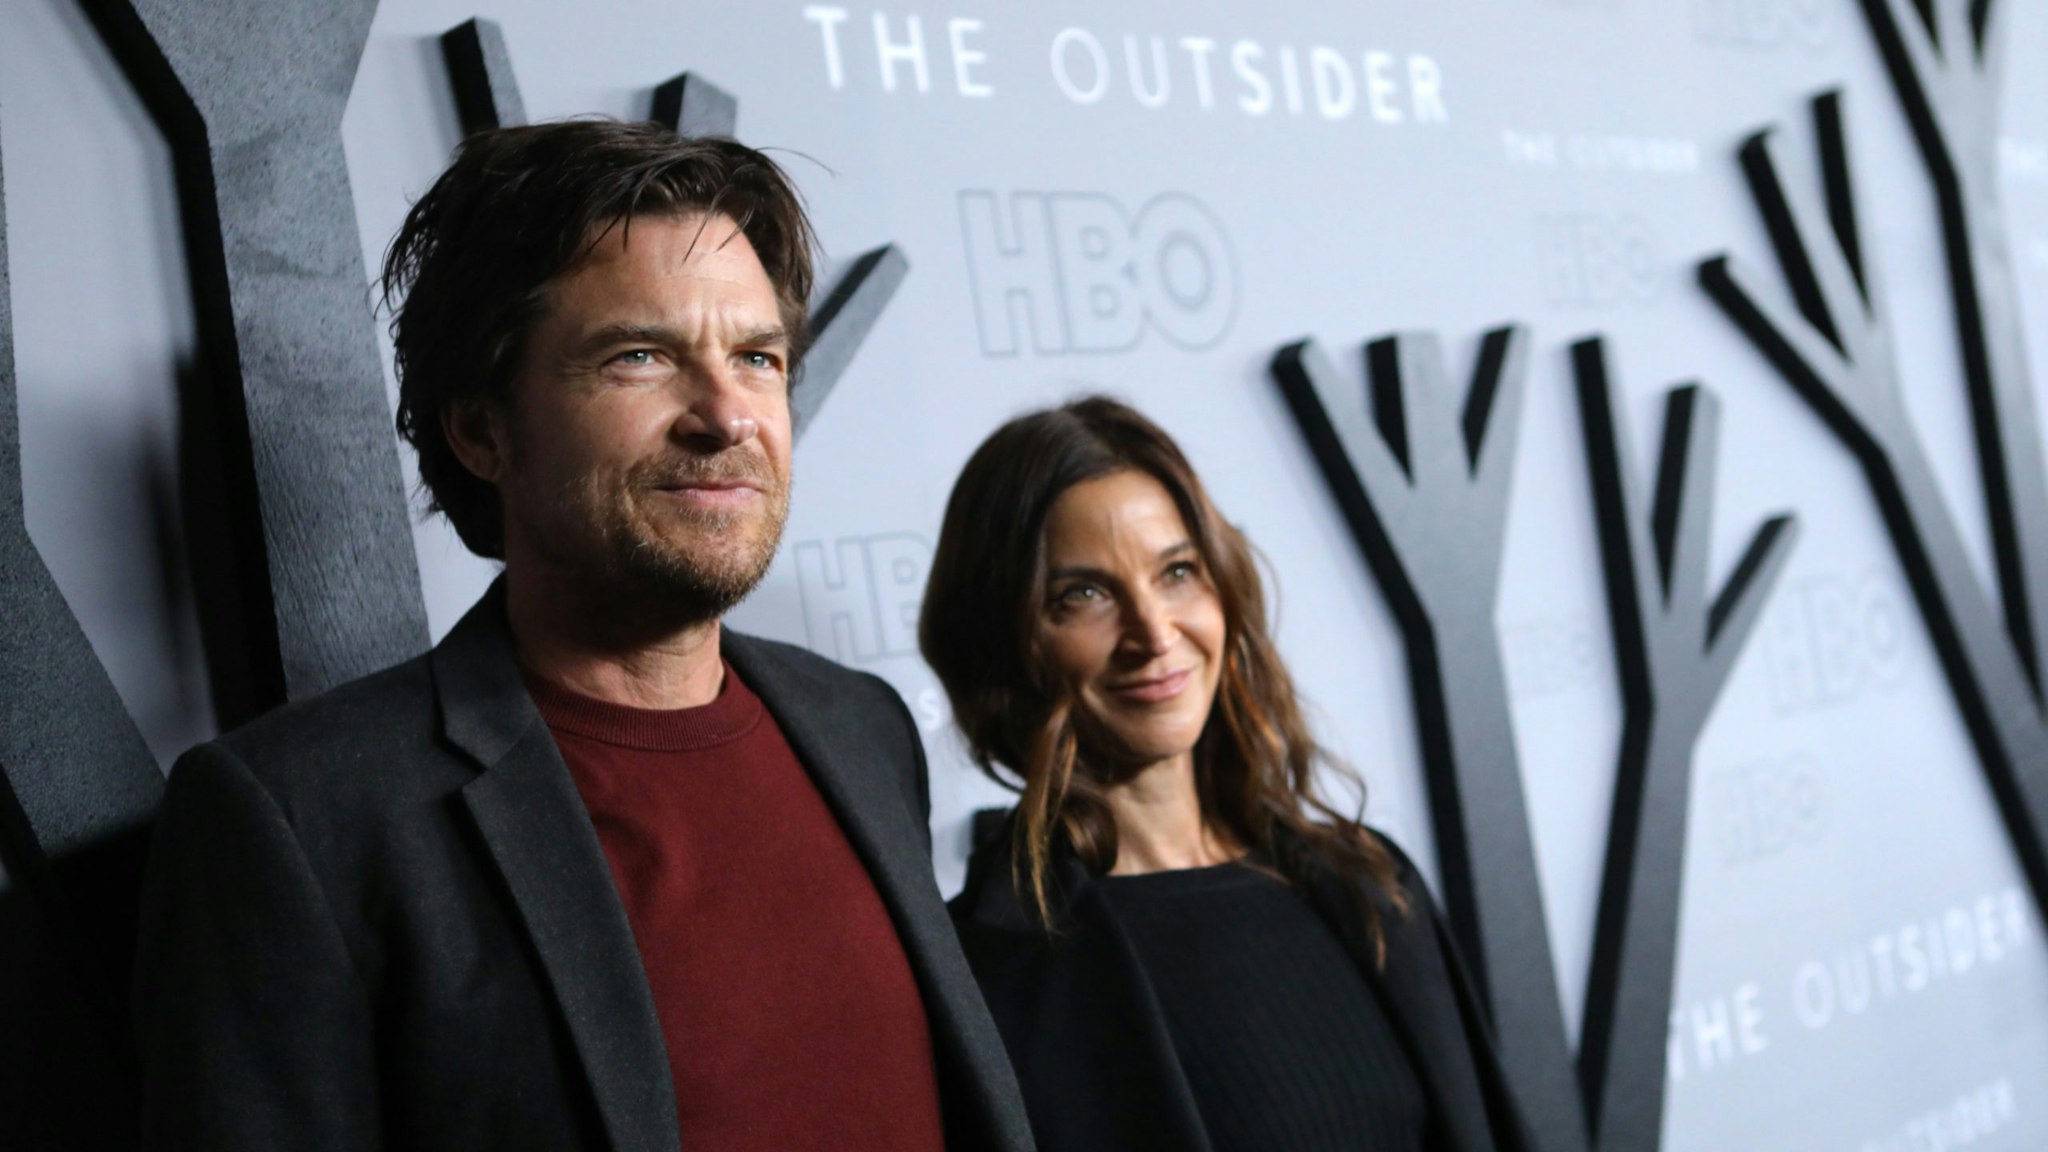 Actor/Director Jason Bateman (L) and Amanda Anka attend the premiere of HBO's "The Outsider" at DGA Theater on January 09, 2020 in Los Angeles, California.